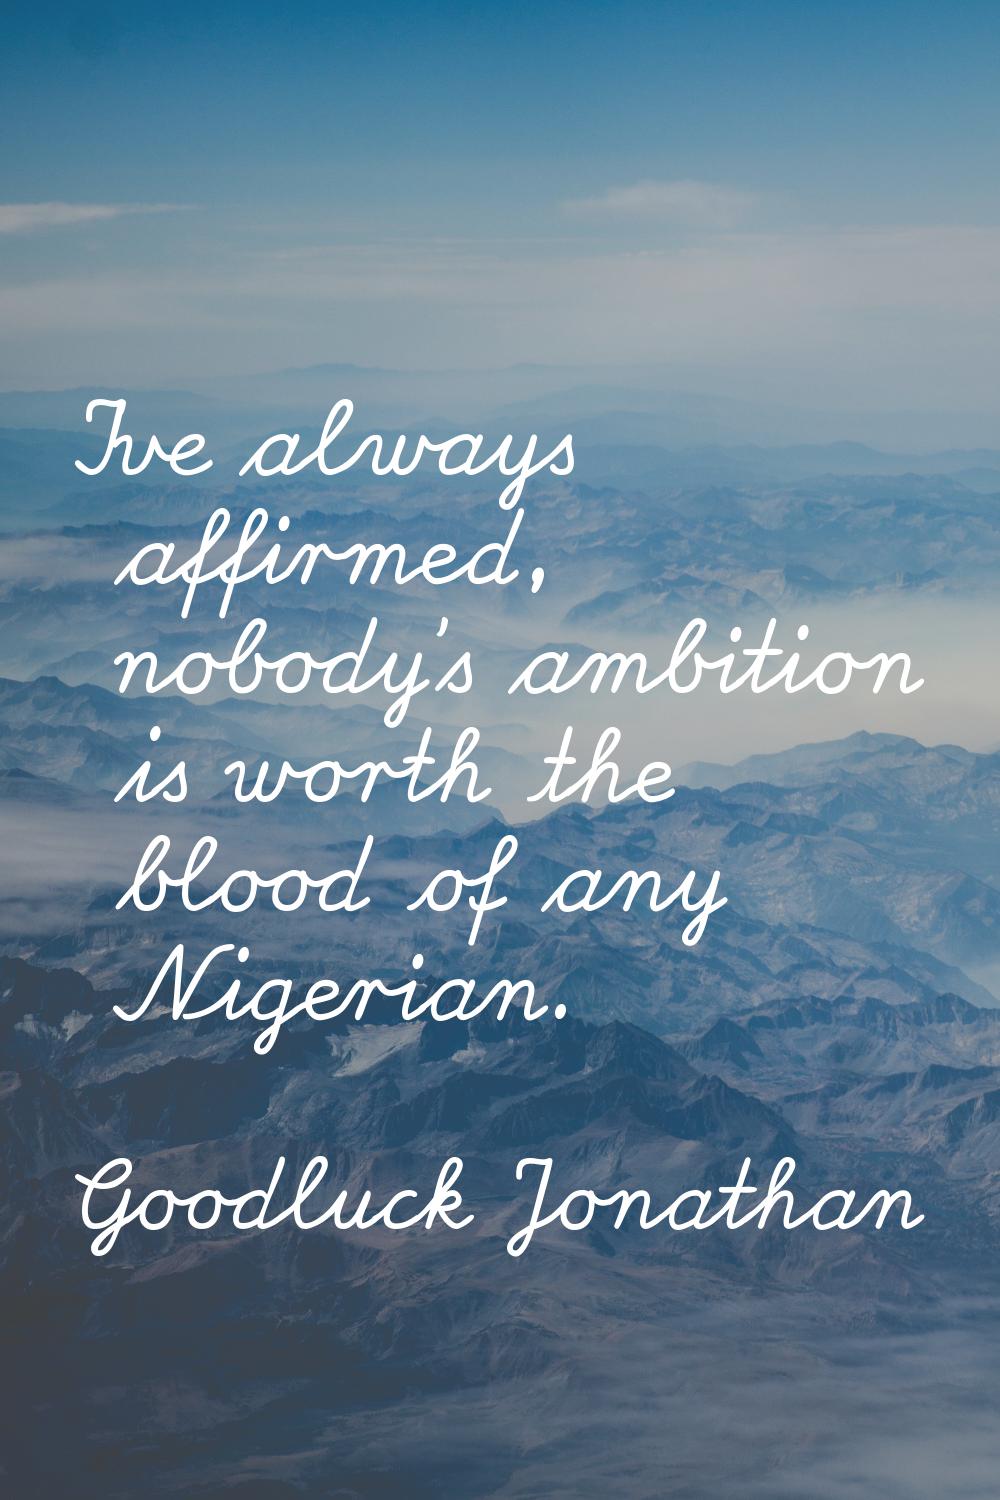 I've always affirmed, nobody's ambition is worth the blood of any Nigerian.